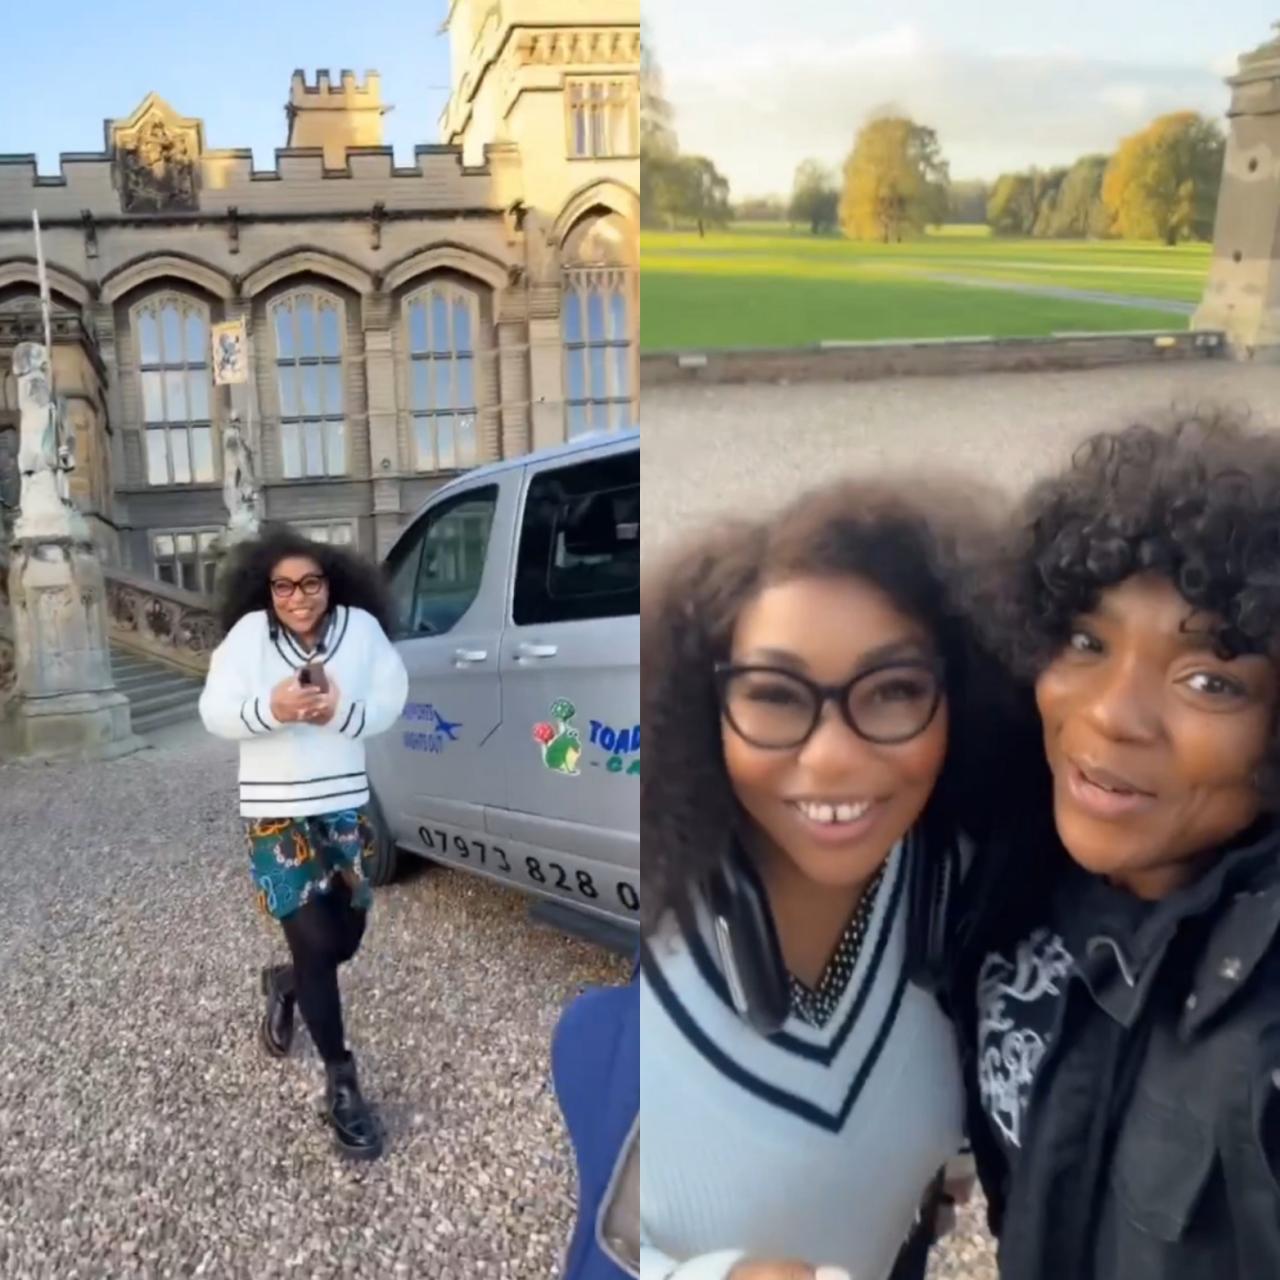 Rita Dominic Welcomes Friends To England Ahead Of Her Church Wedding To Fidelis Anosike (Video)